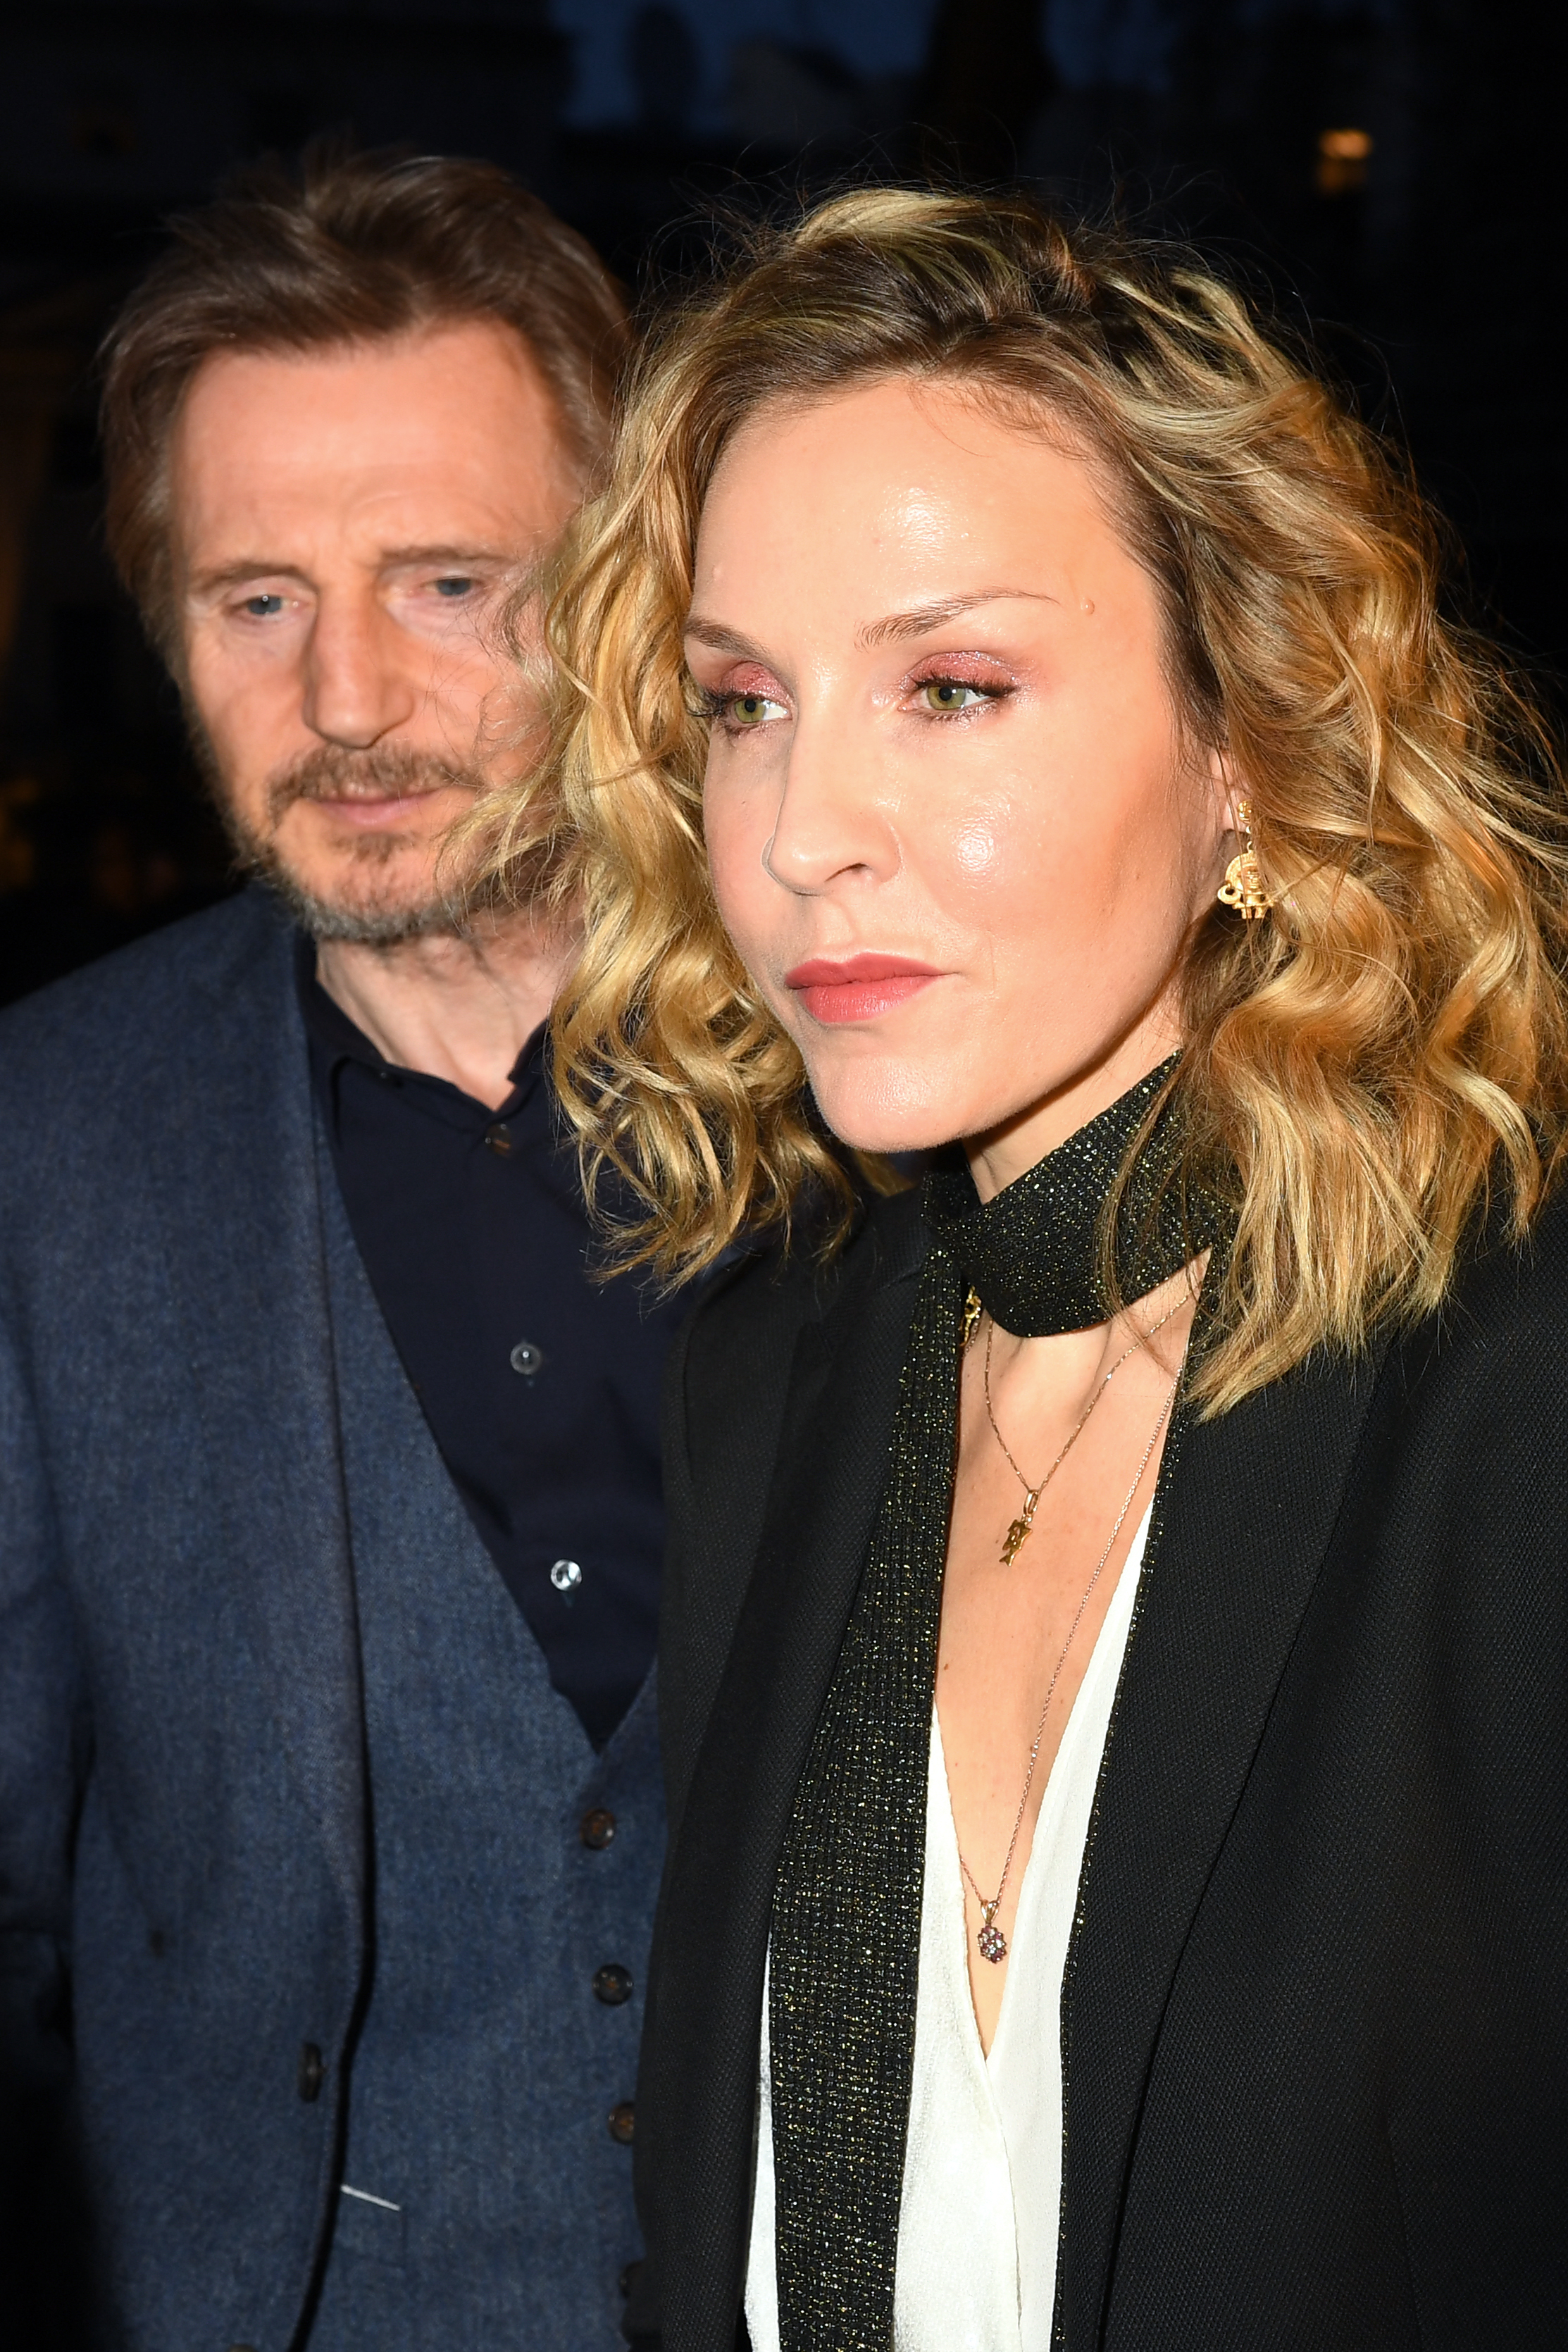 Liam Neeson and Freya St. Johnson at the "The White Crow" UK Premiere | Source: Getty Images